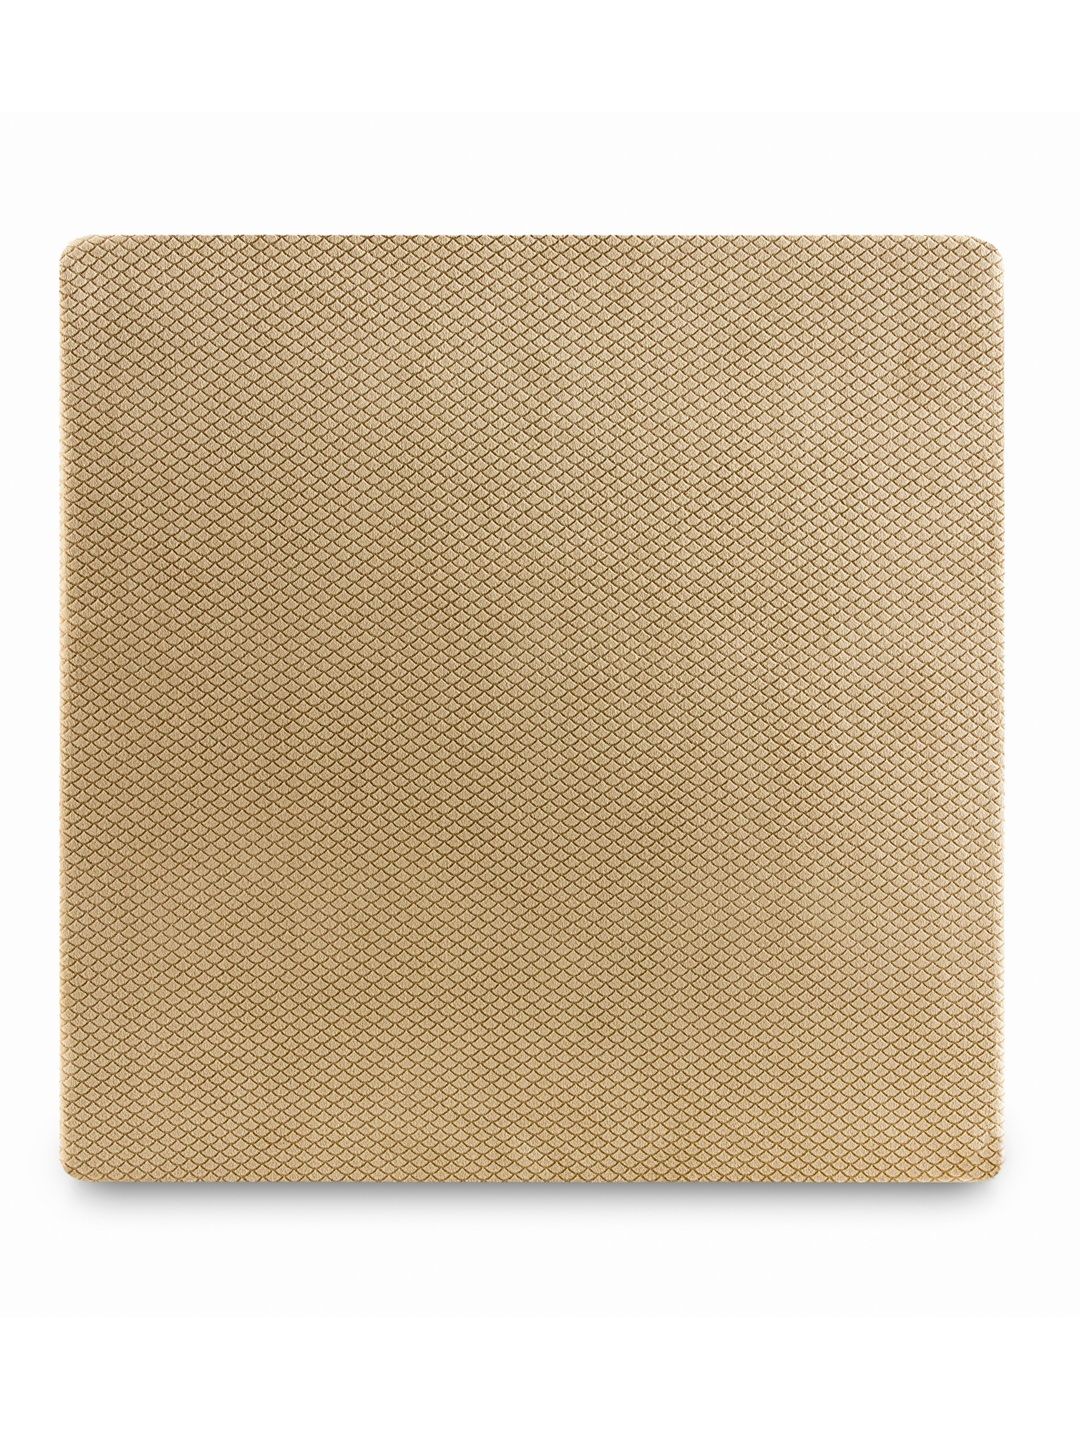 The White Willow Beige Premium Memory Foam Chair Pad Price in India